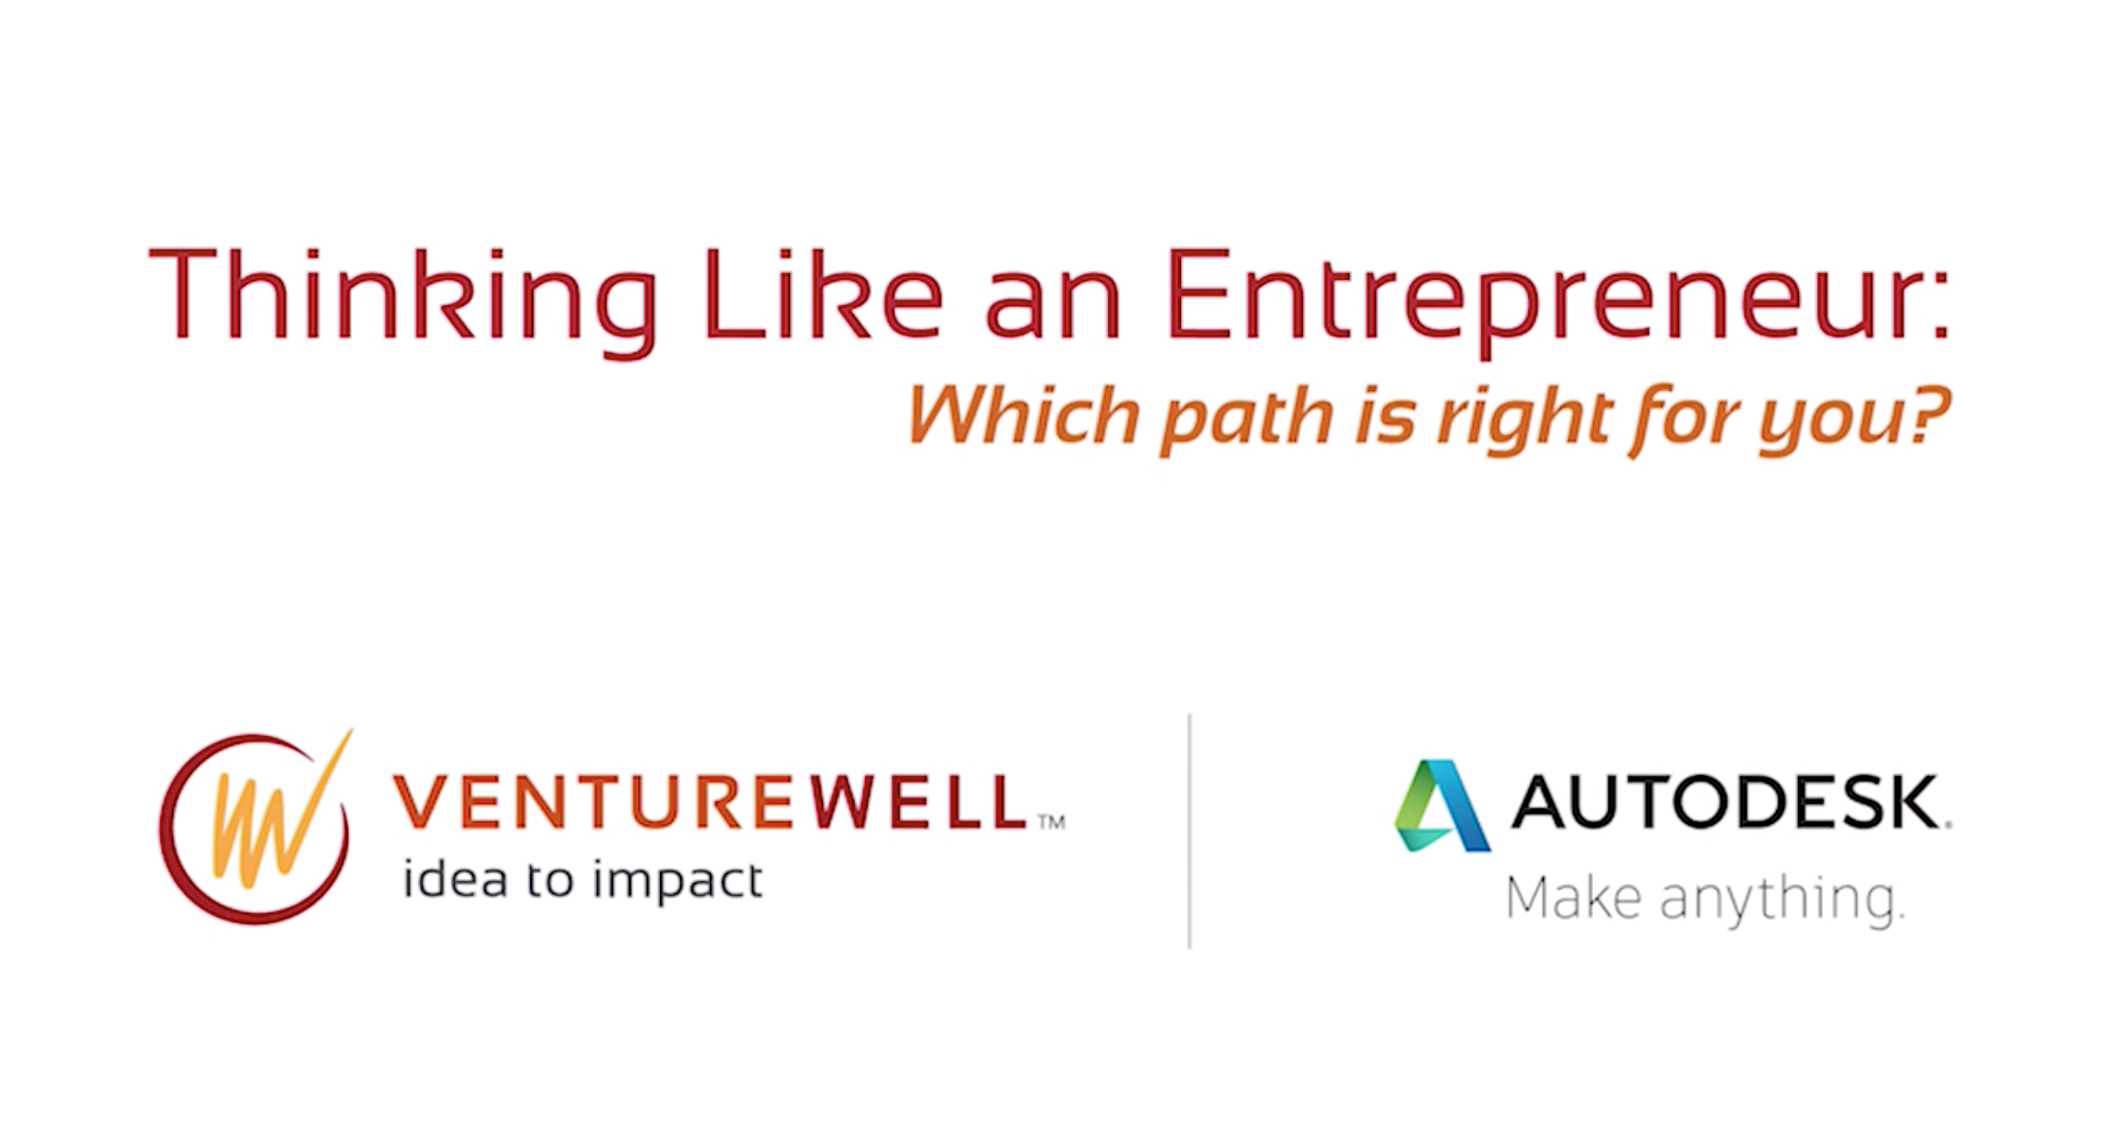 Thinking Like An Entrepreneur: Which path is right for you?